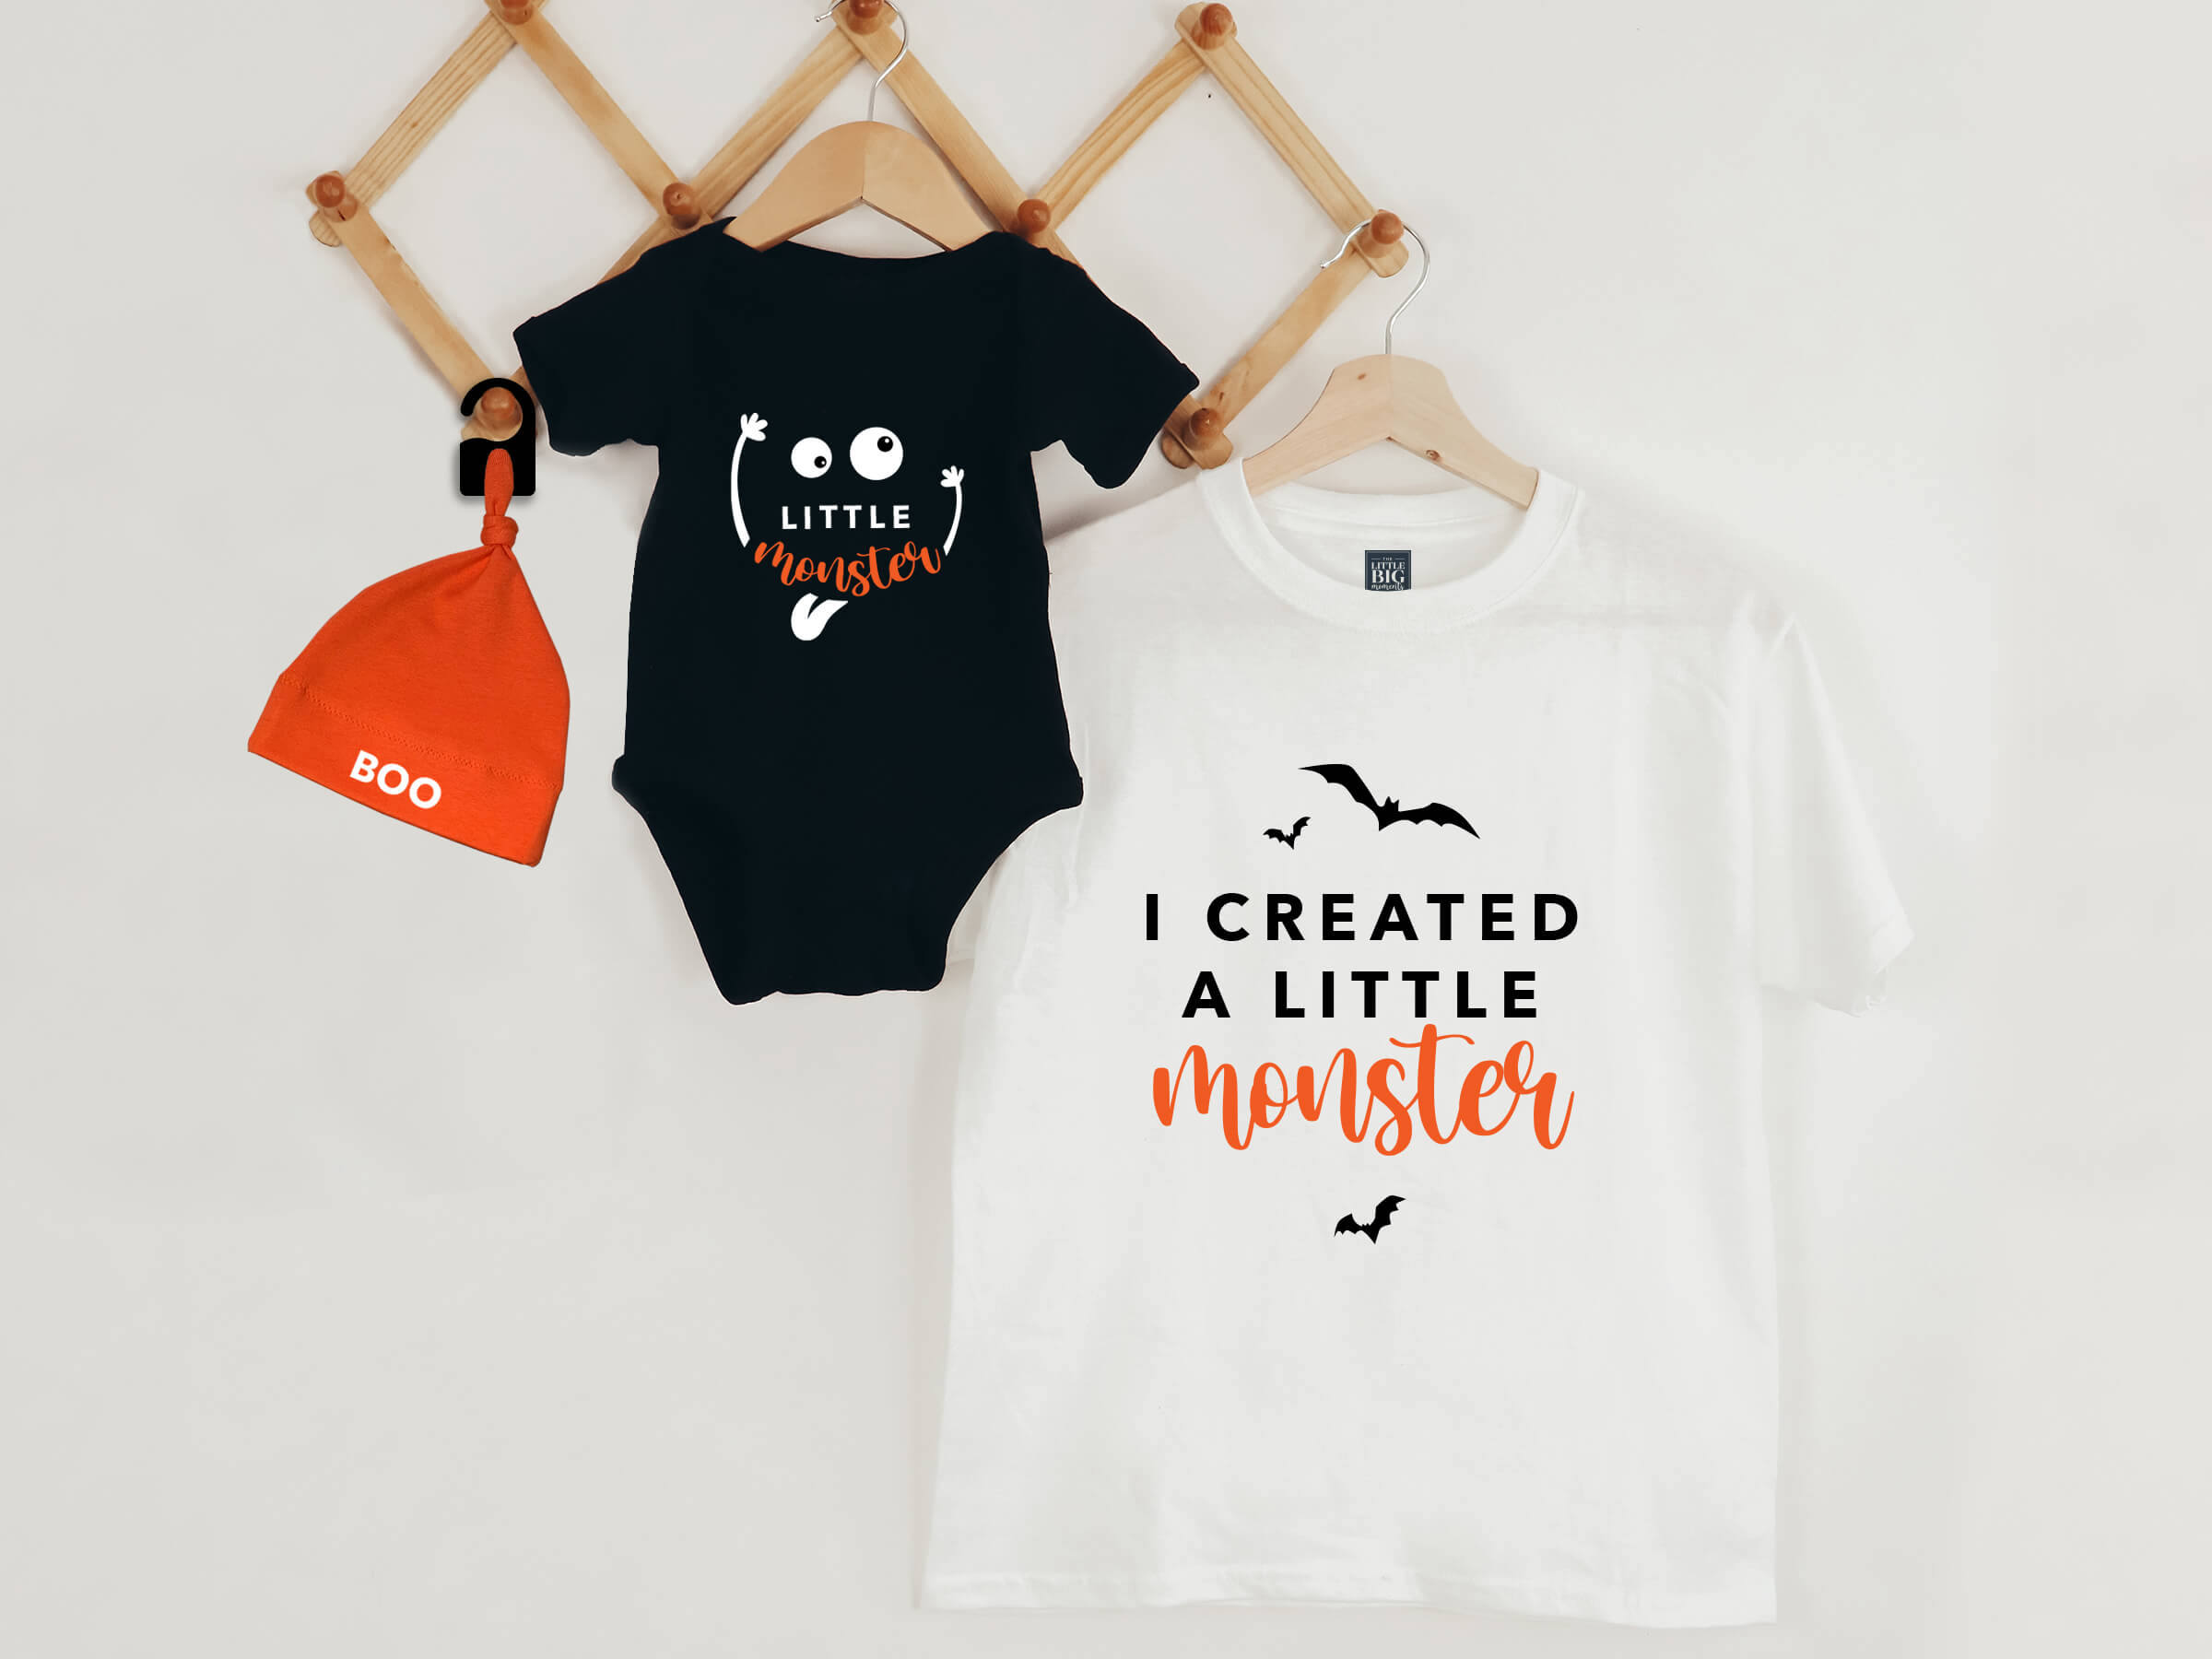 I Created a Little Monster - Matching Baby and Parent Halloween Outfit